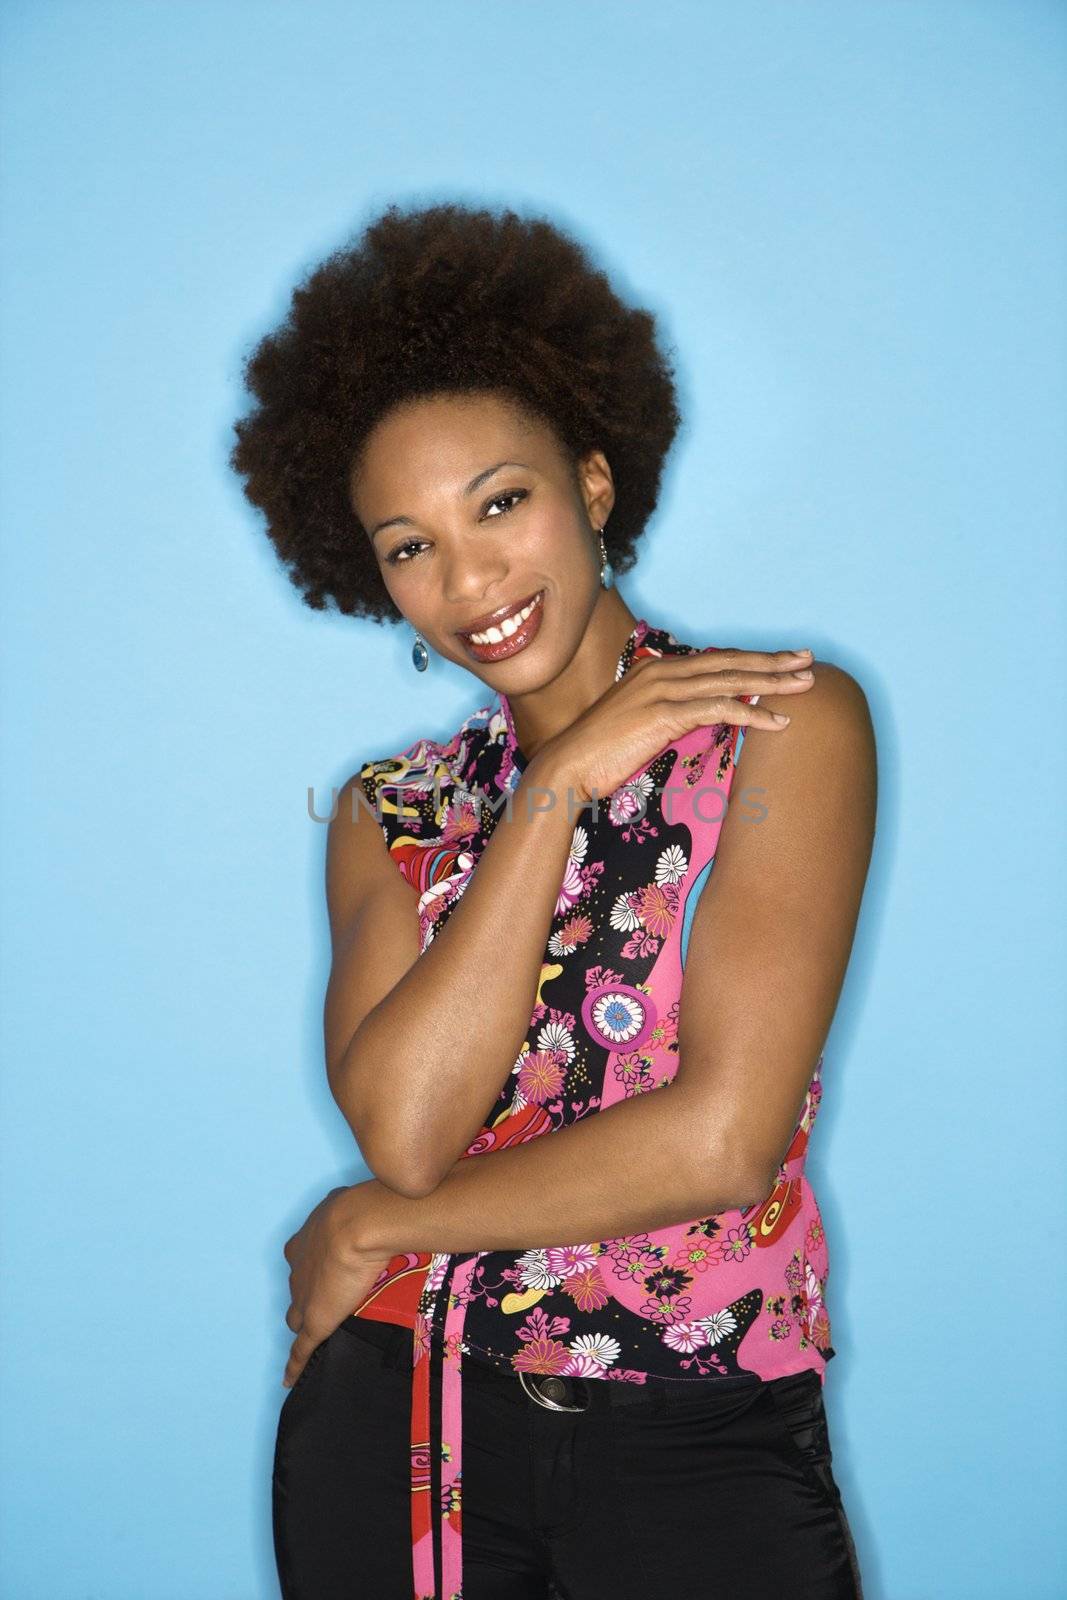 Woman with afro wearing vintage print fabric smiling.